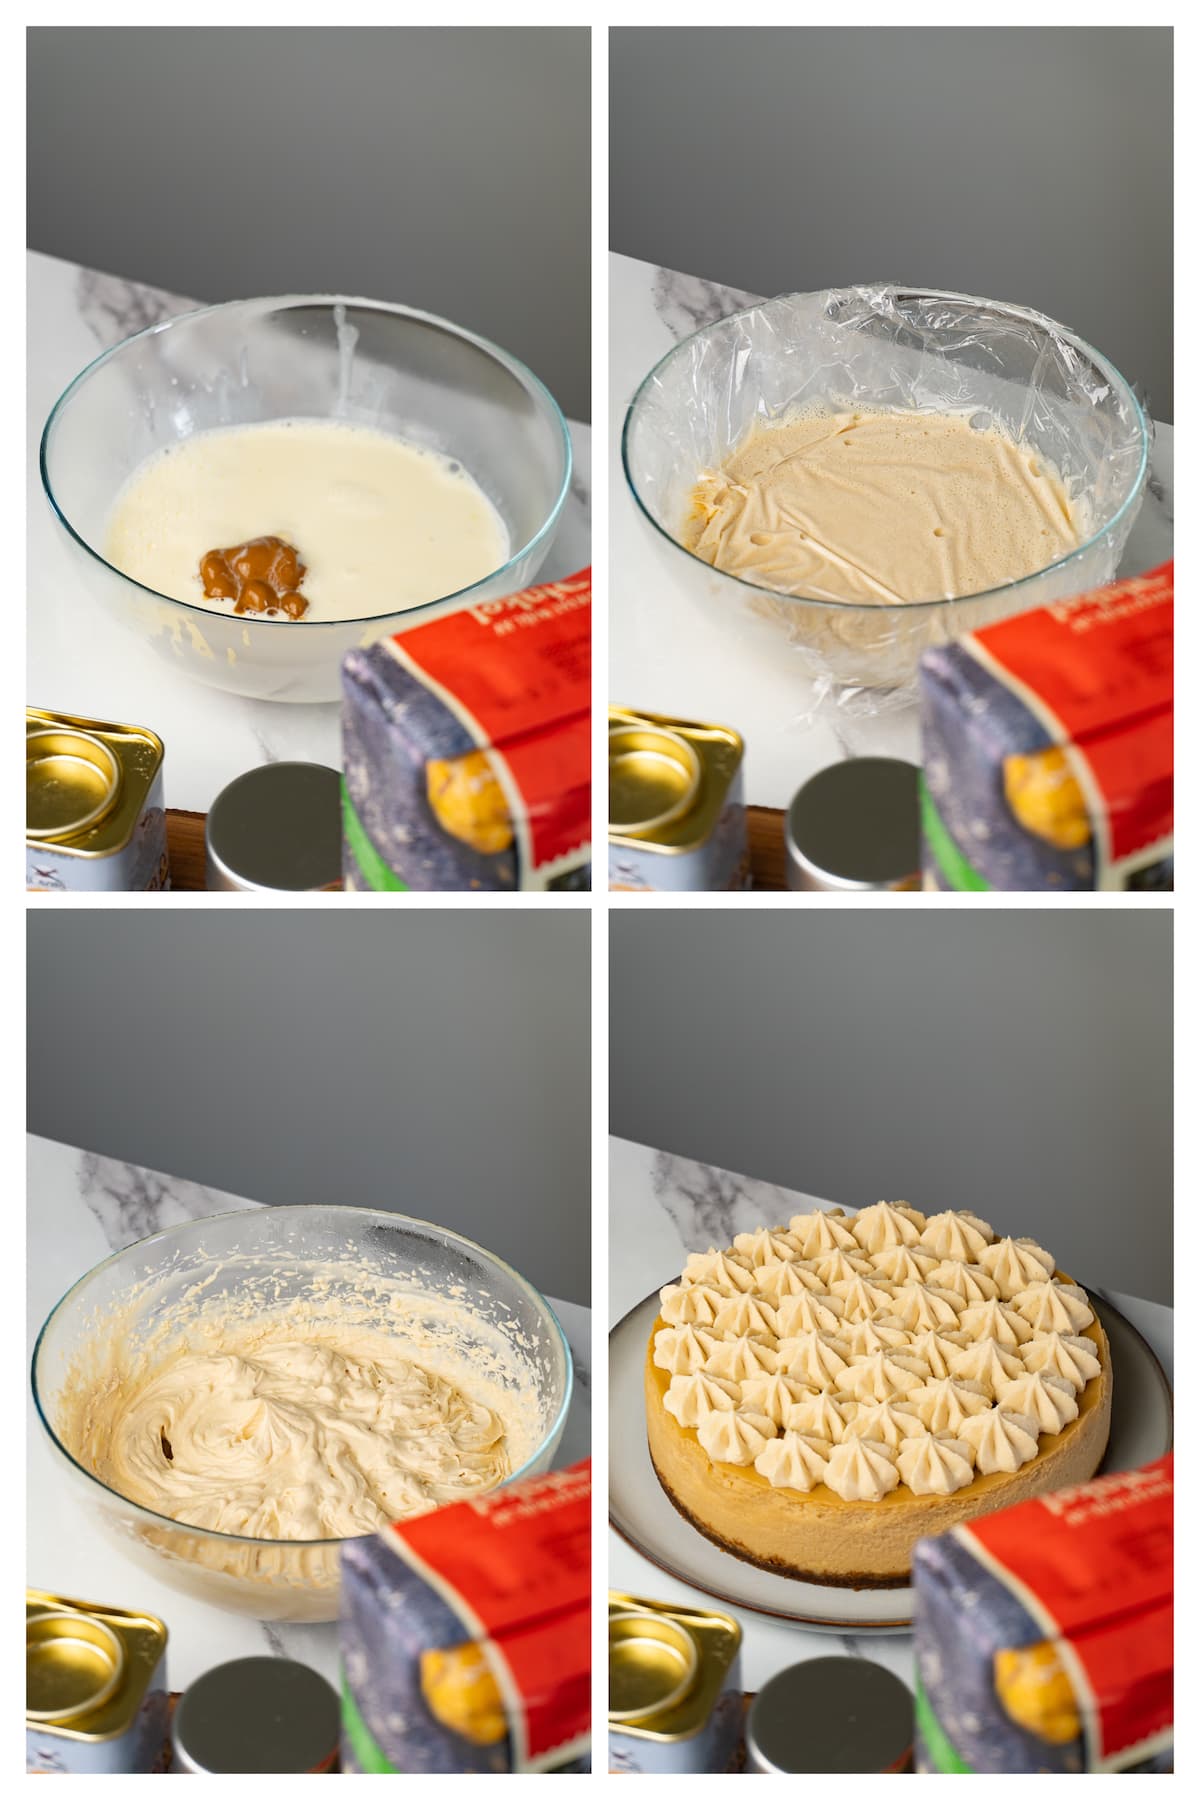 A collage image shows how to make Biscoff cream and decorate a cheesecake with it in four steps.